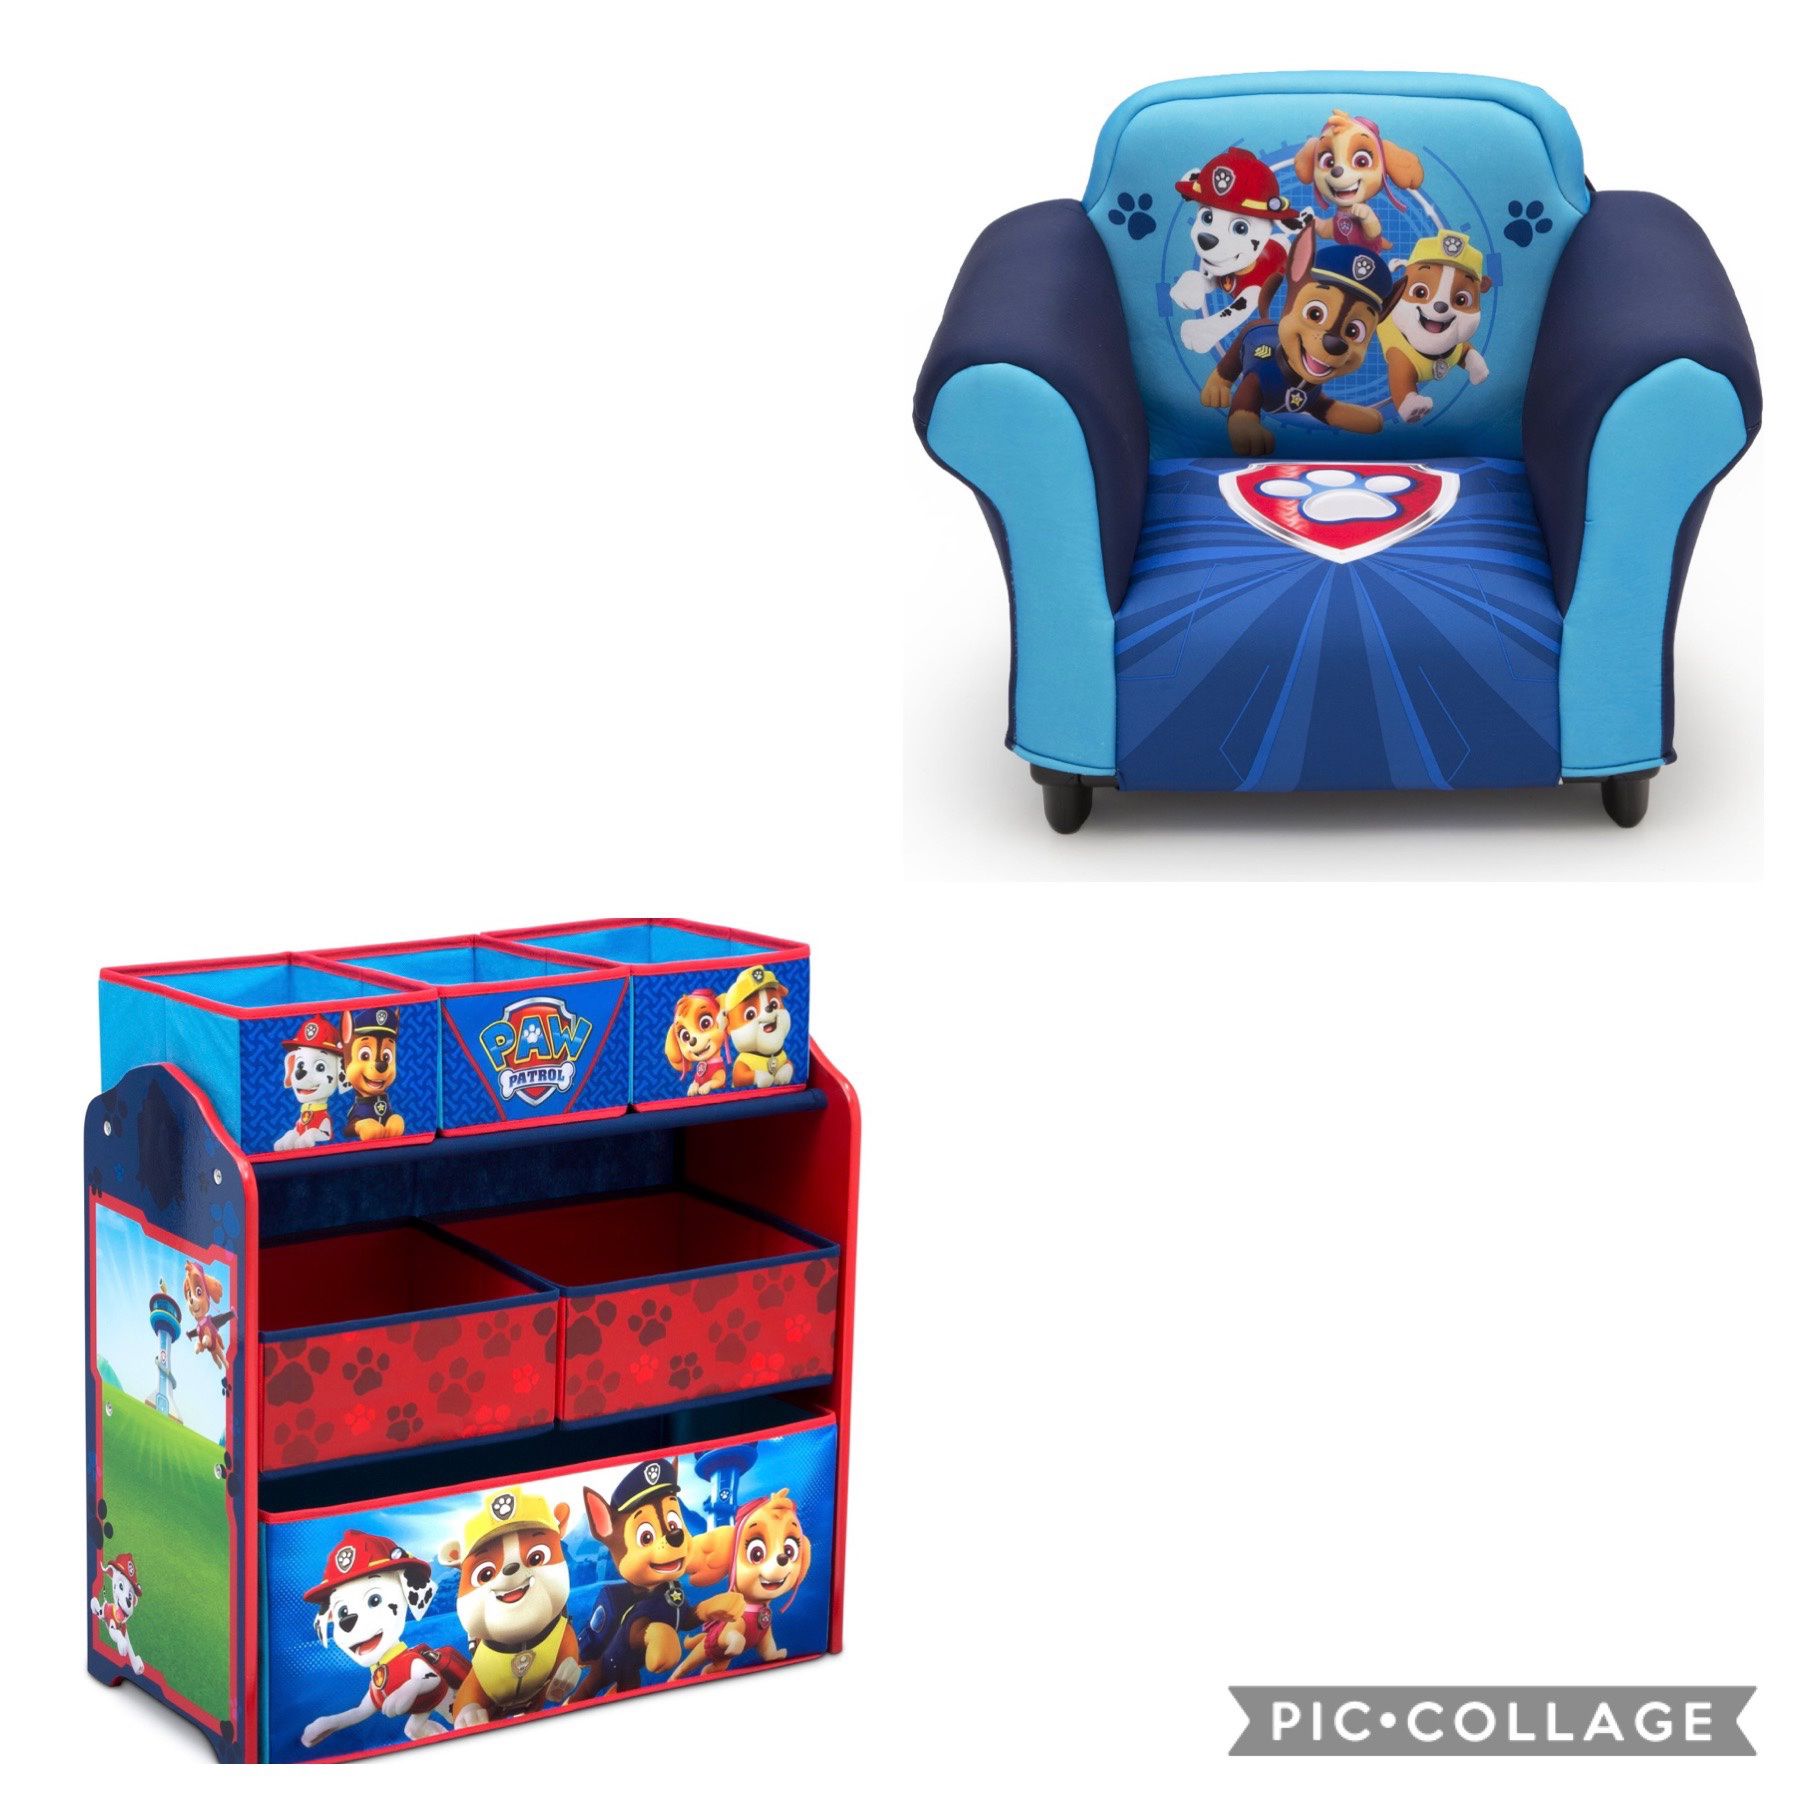 Paw Patrol Chair And Toy Storage